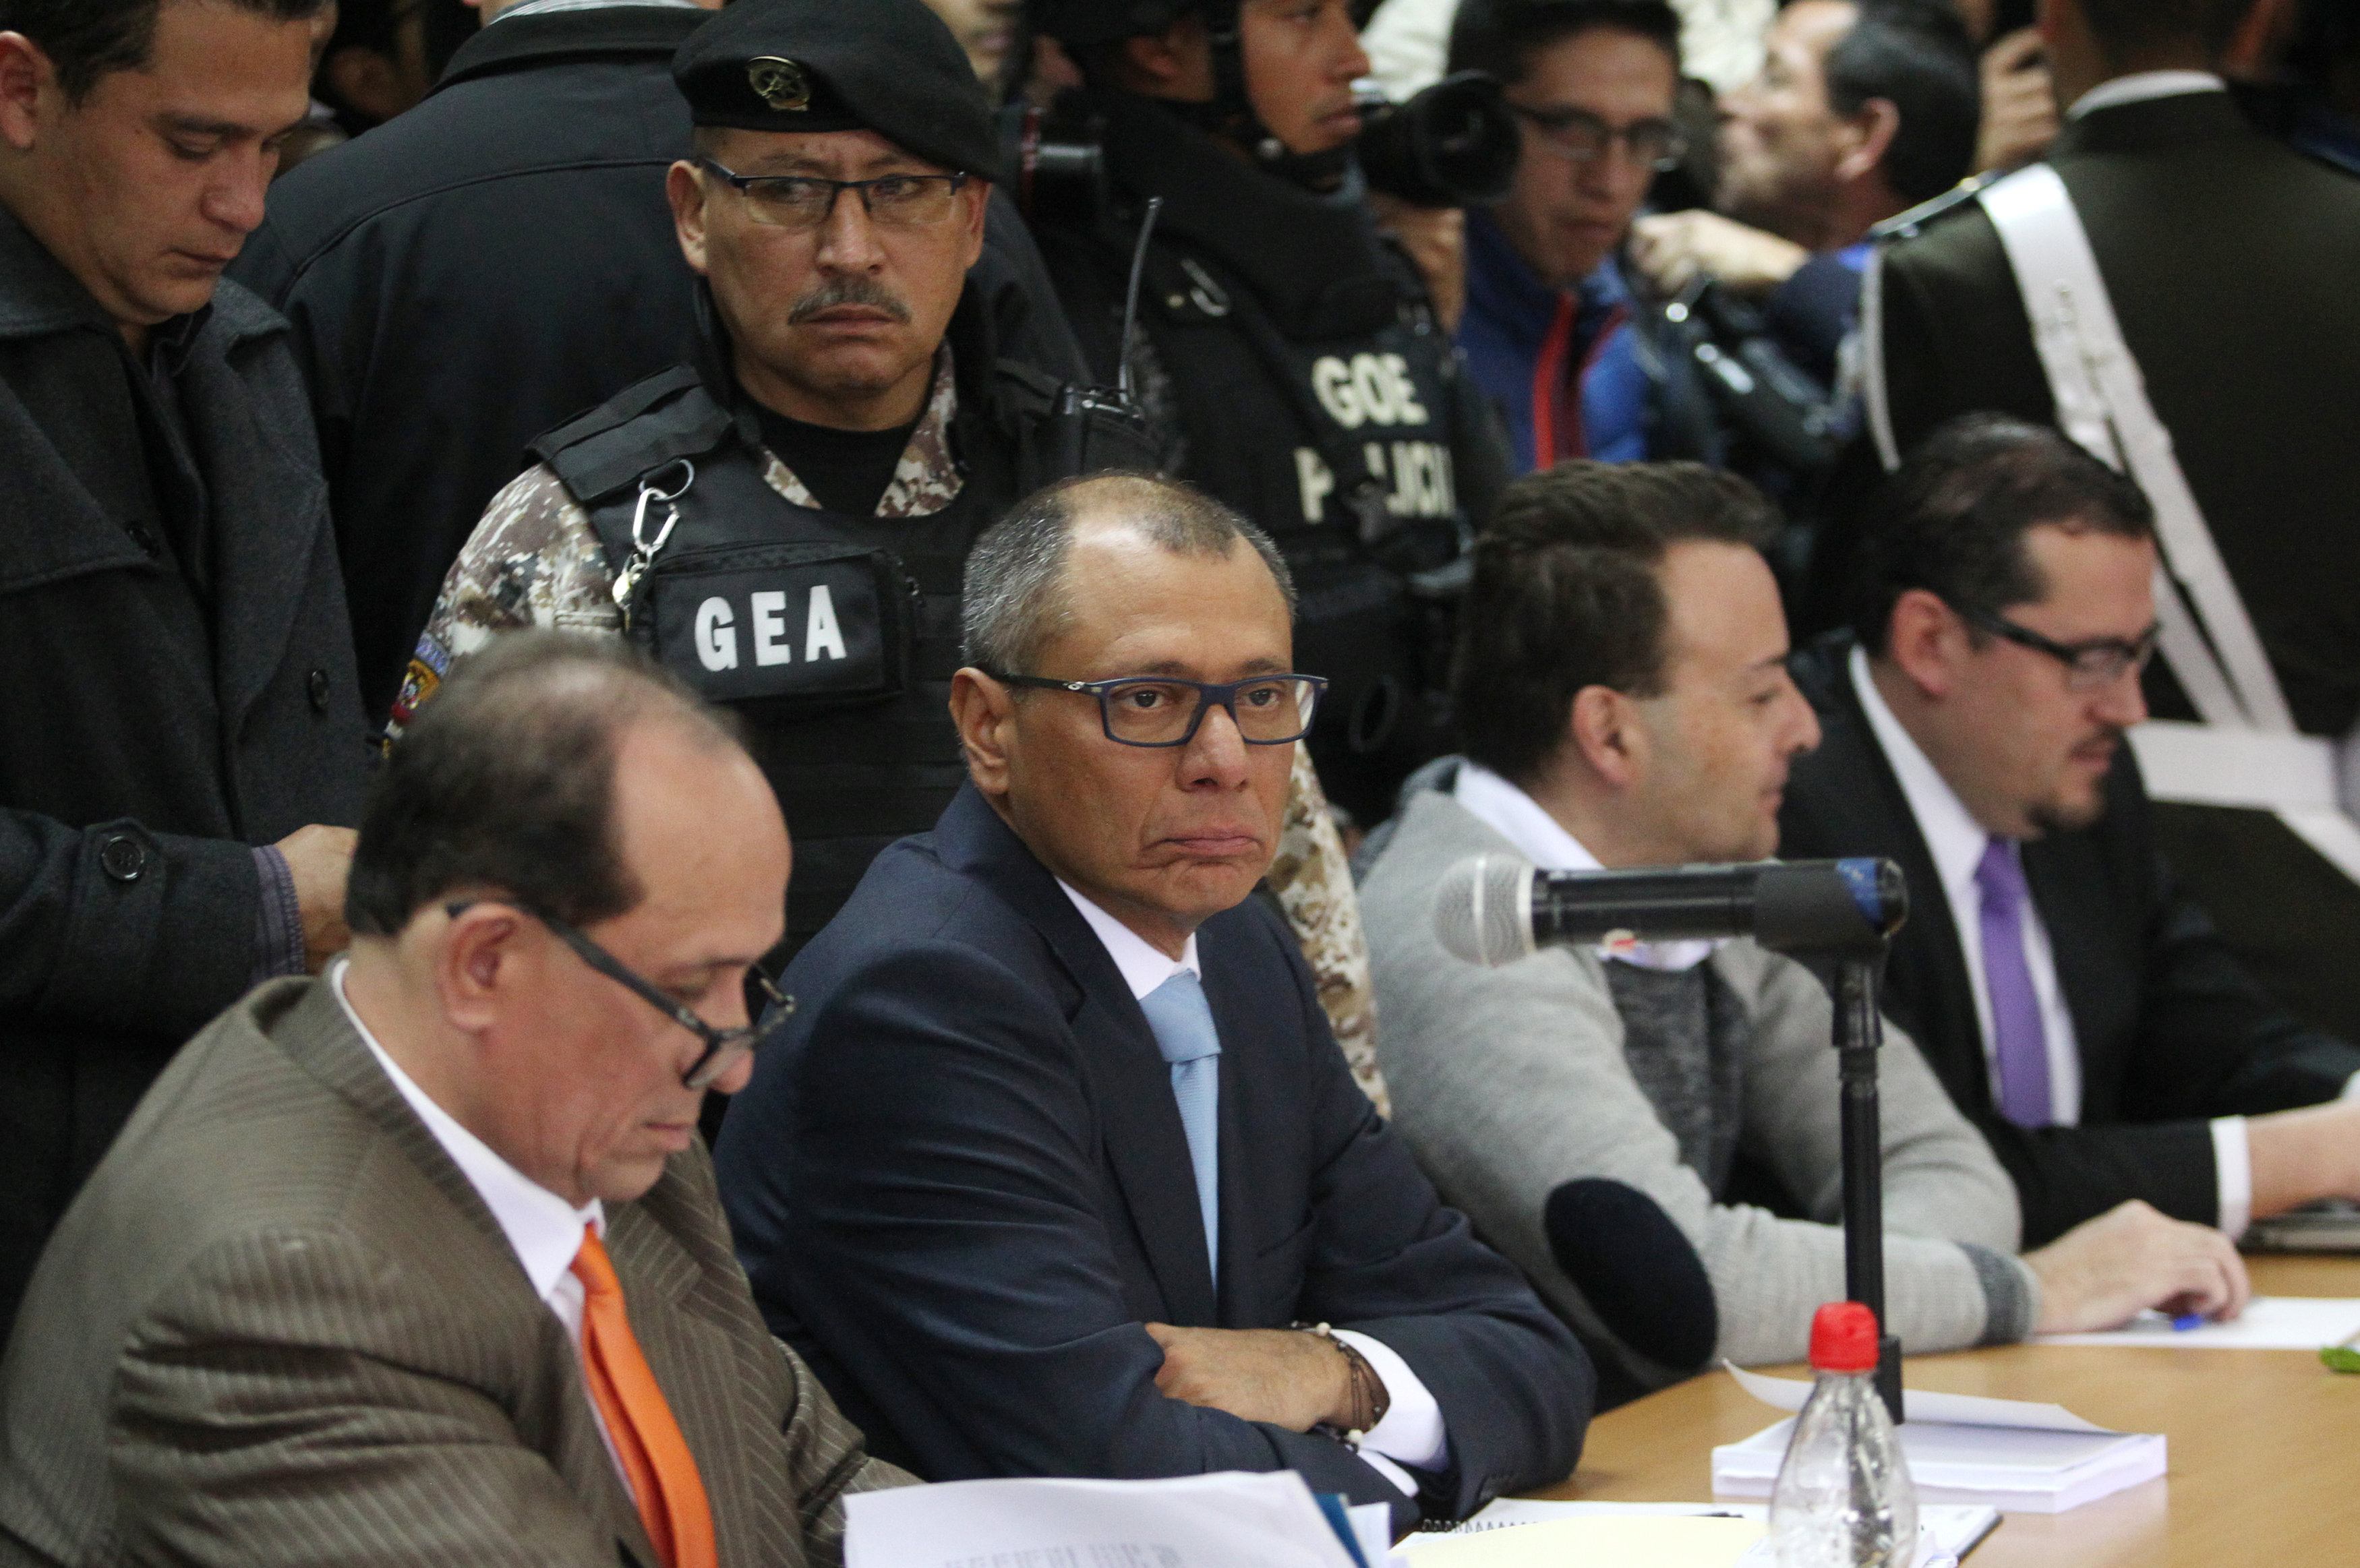 Ecuadorean former Vice-President Jorge Glas attends trial for corruption in the ongoing Odebrecht scandal.